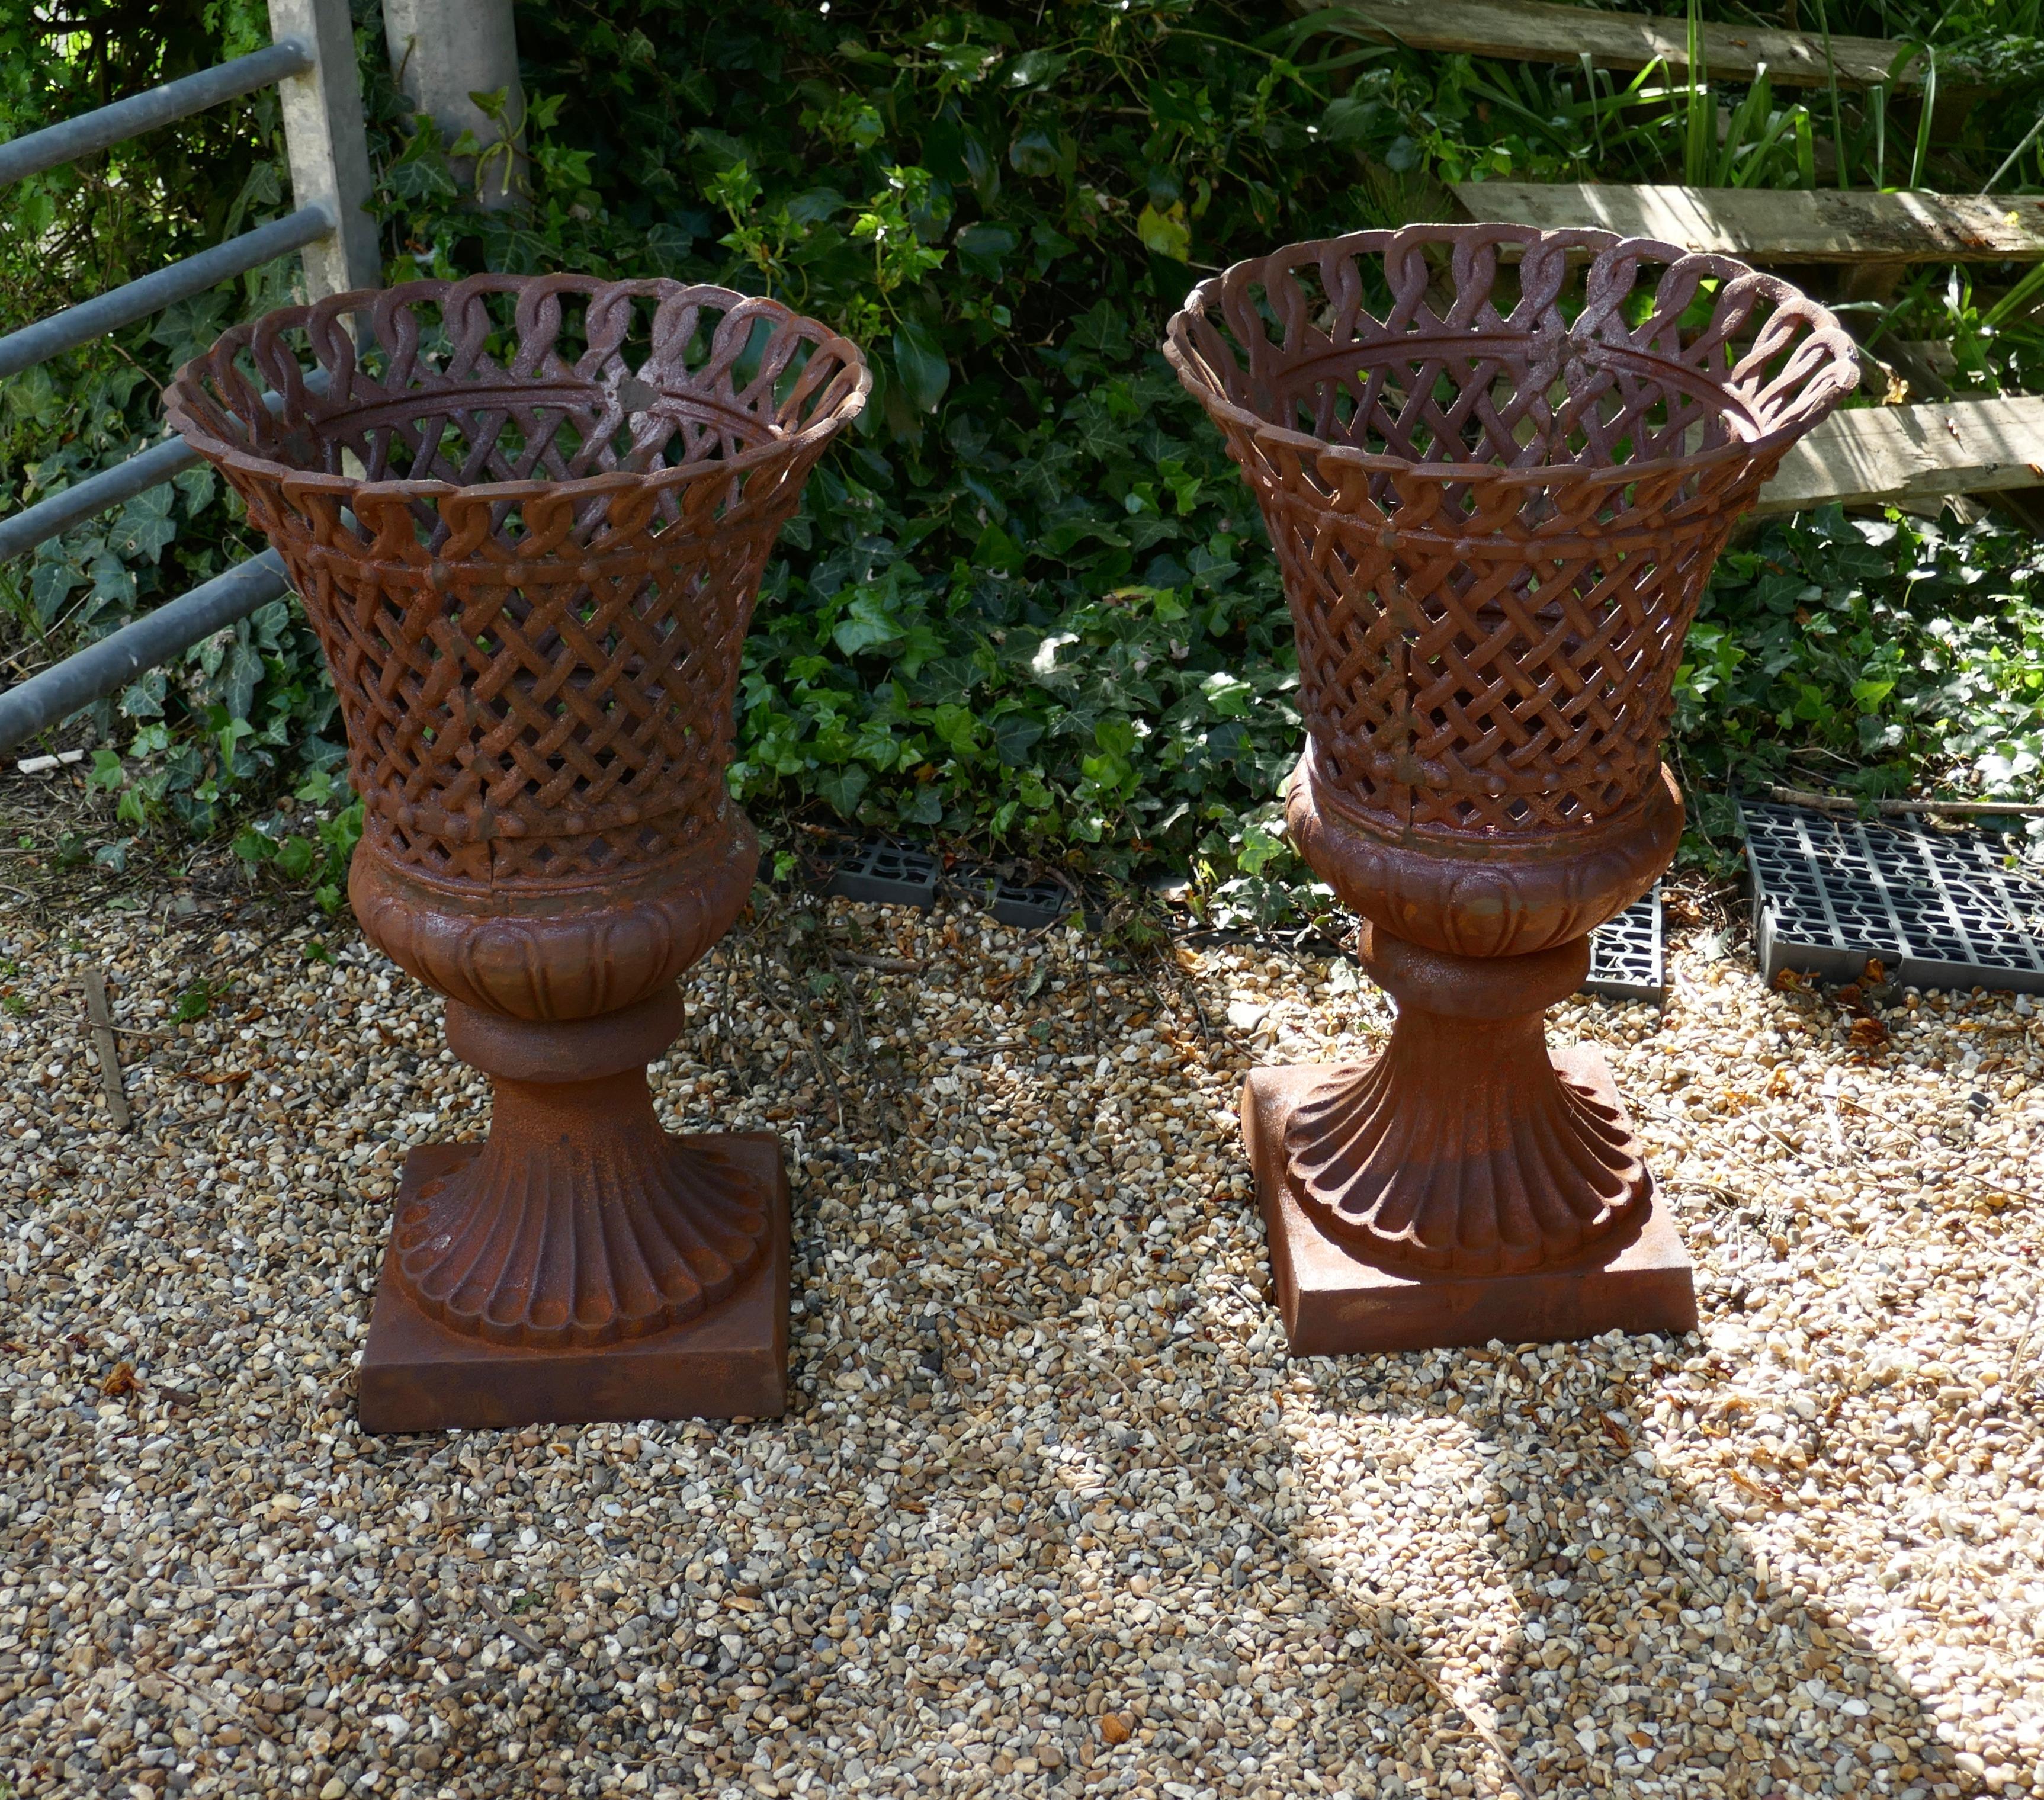 Unusual Pair of Lattice Work Cast Iron Garden Urns

This is a superb and unusual large pair of cast iron urns, they have an open work frame 
The urns are weather worn and have a rusty patina, they are otherwise in good condition 

The urns are